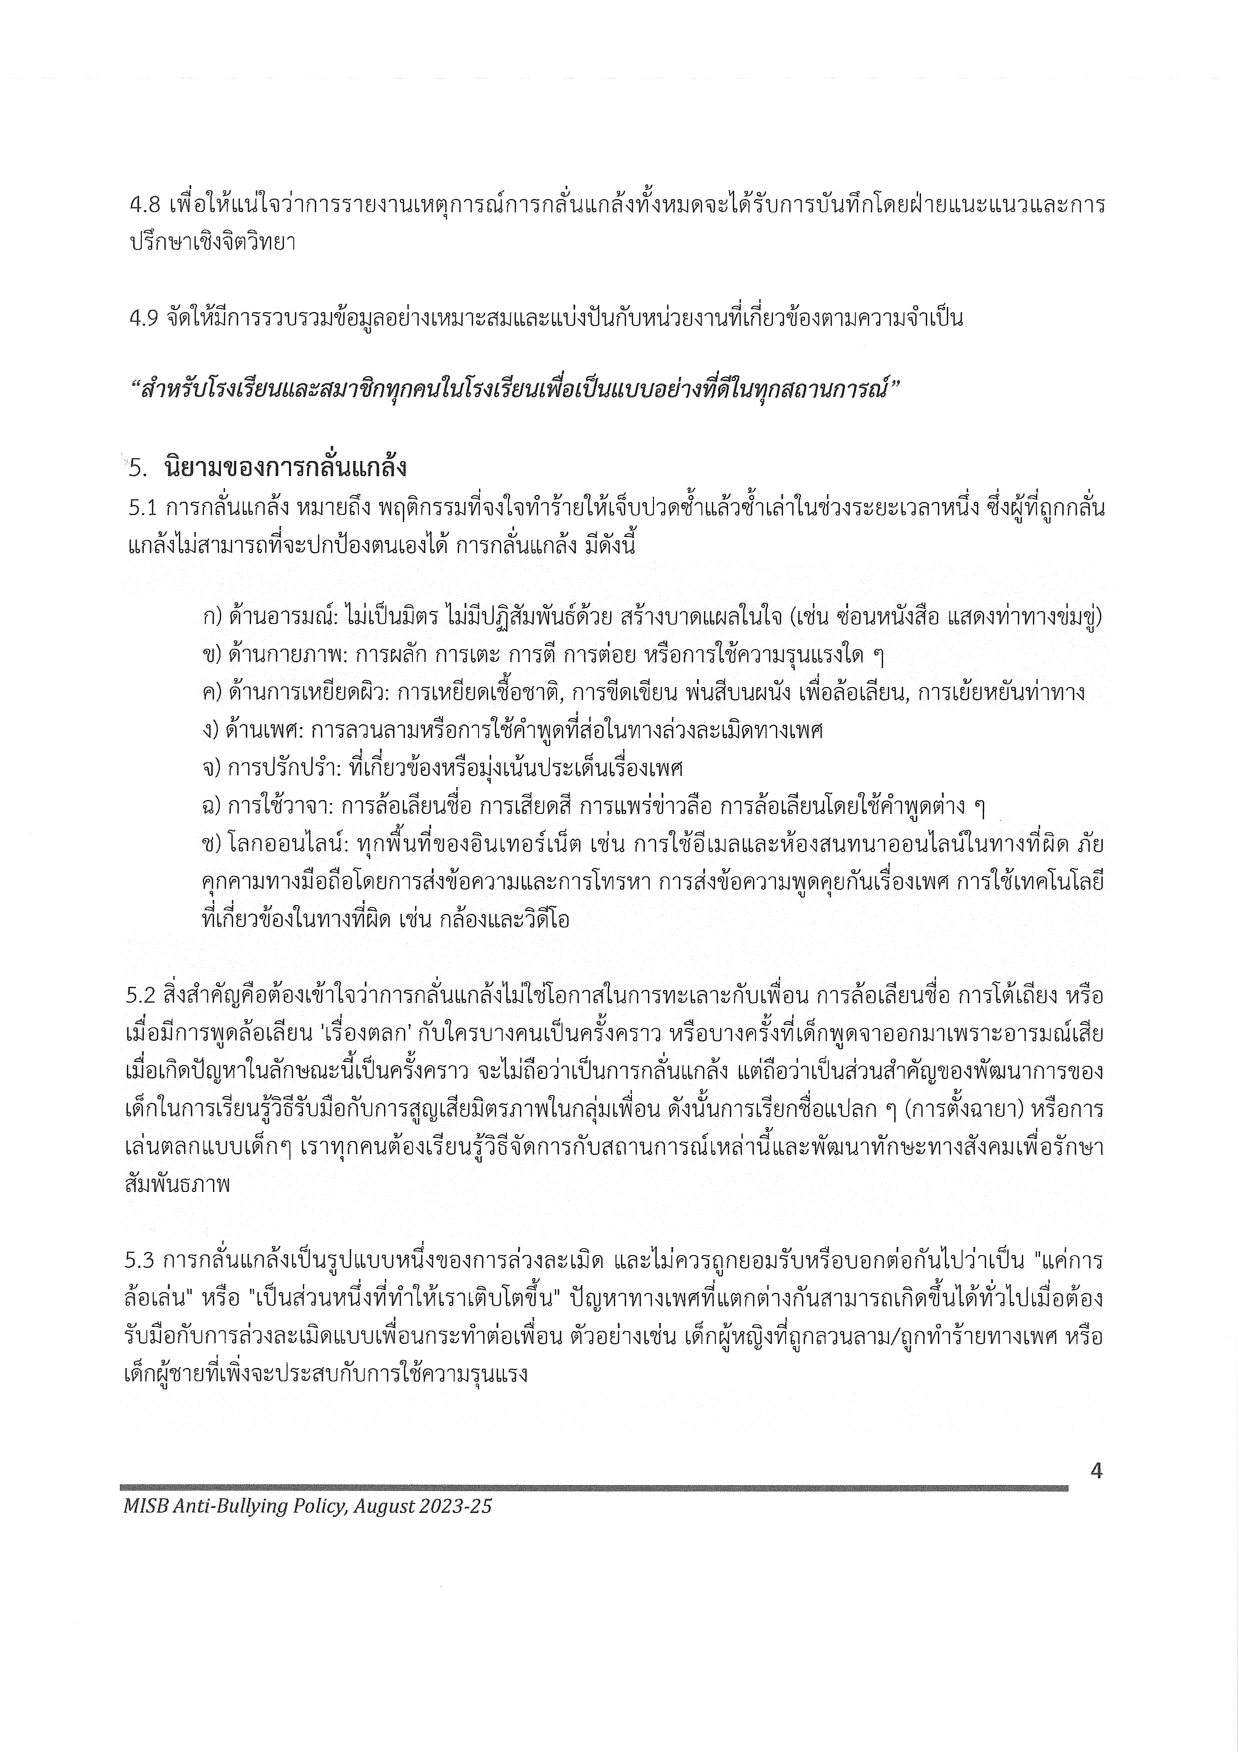 Anti Bullying Policy 2023 2025 Thai page 0006